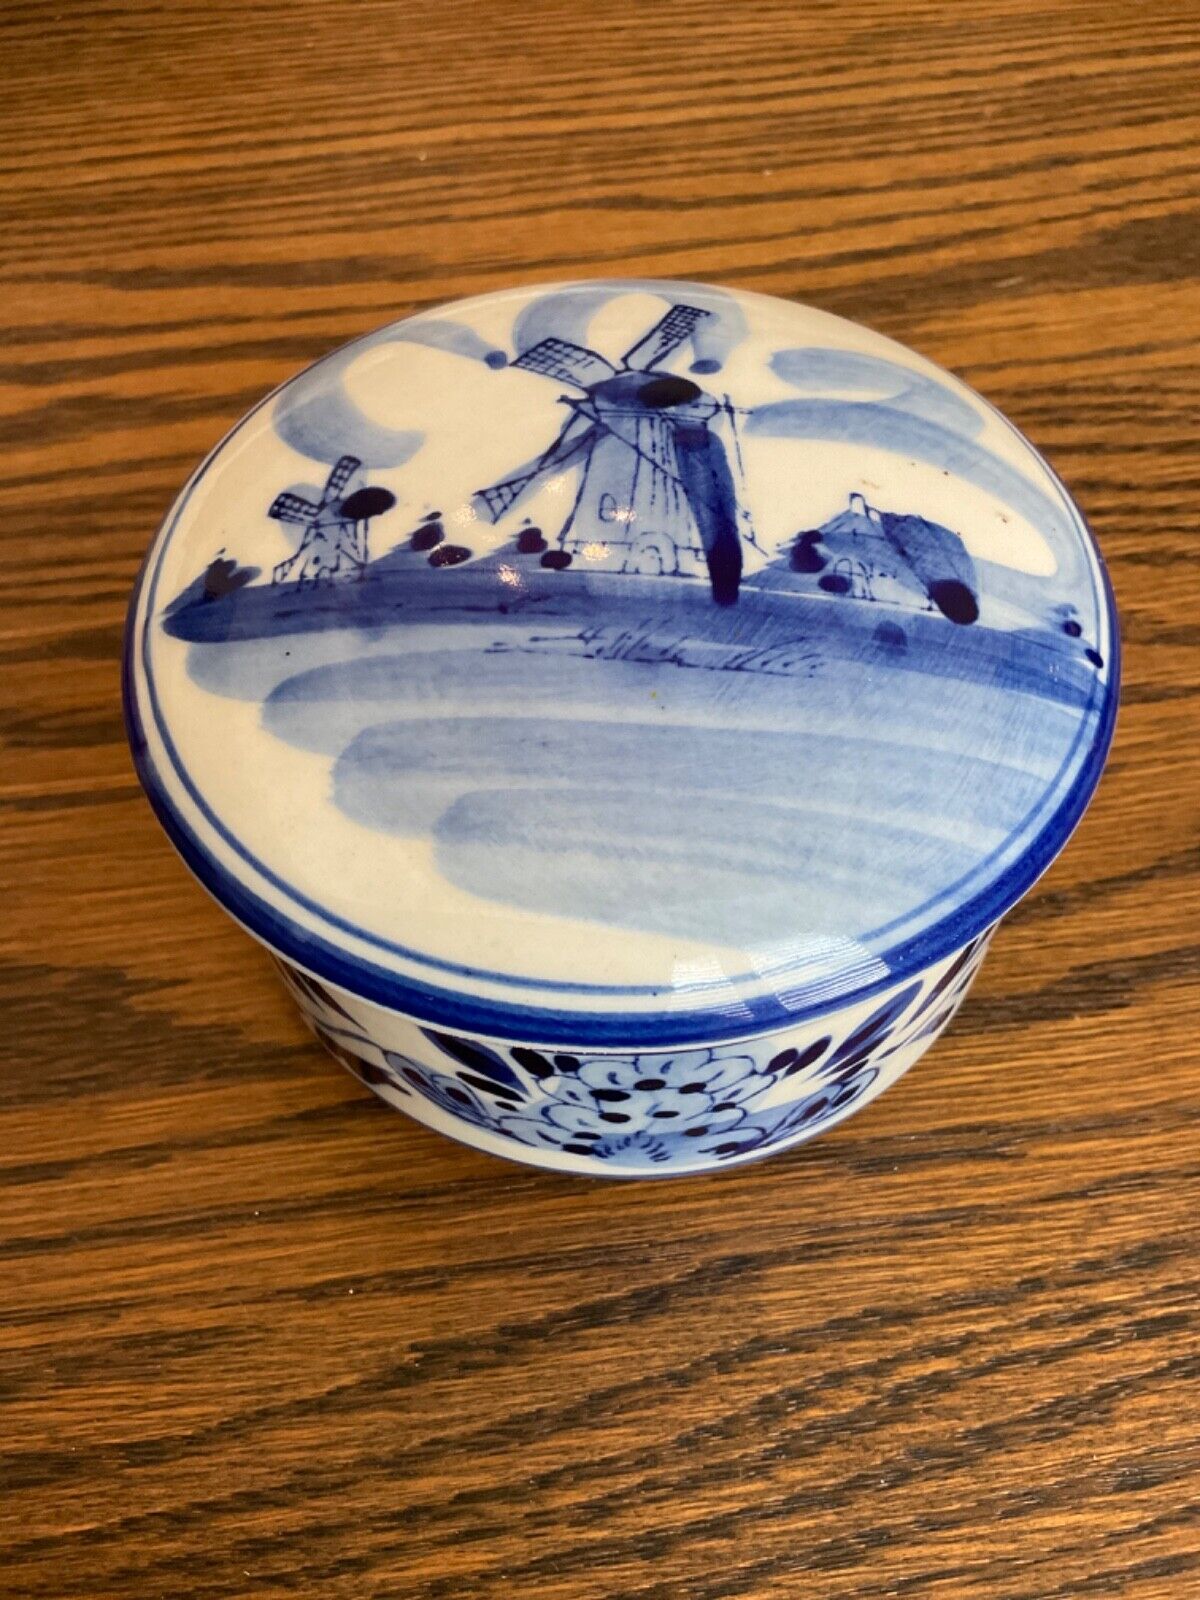  E & H  4” Delft Signed Blue Porcelain Trinket Box with Holland Windmill  